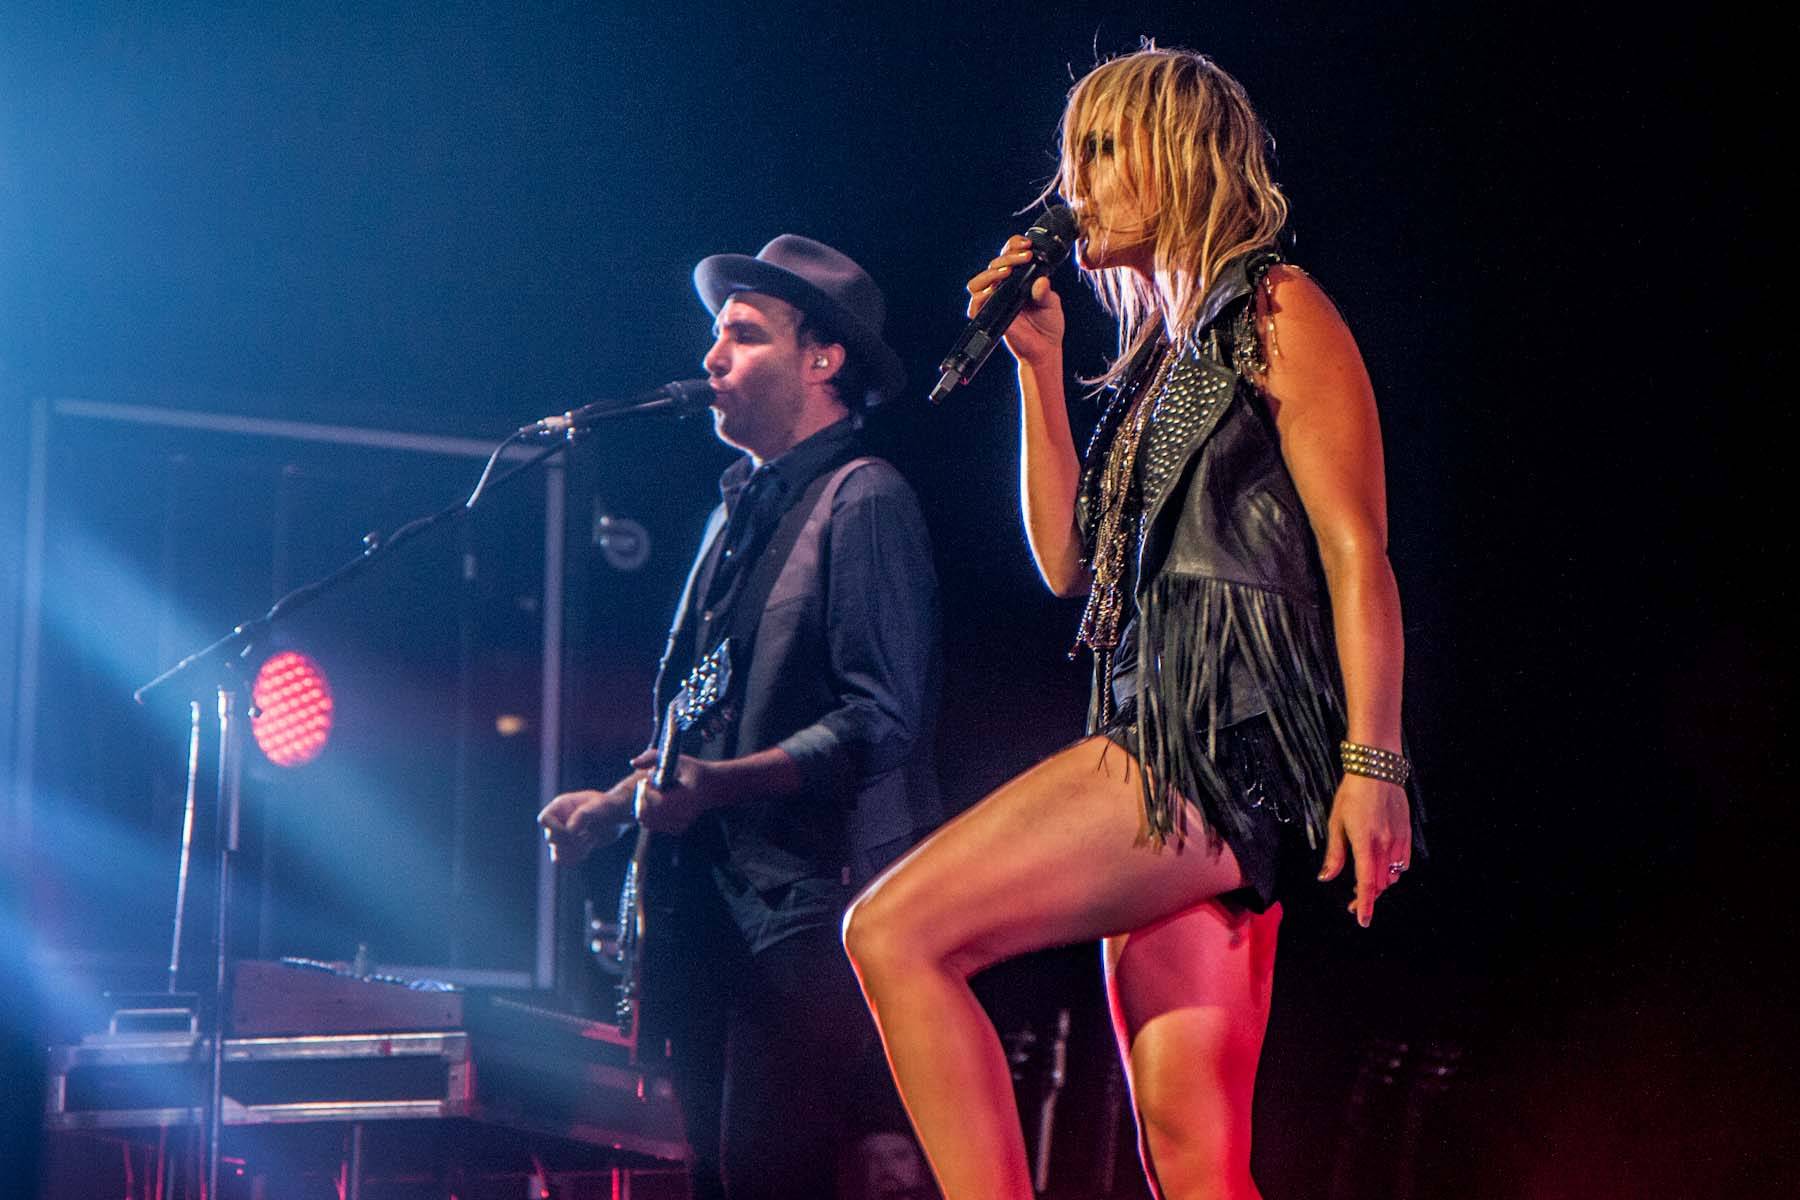 Metric at Rogers Arena Vancouver concert photo